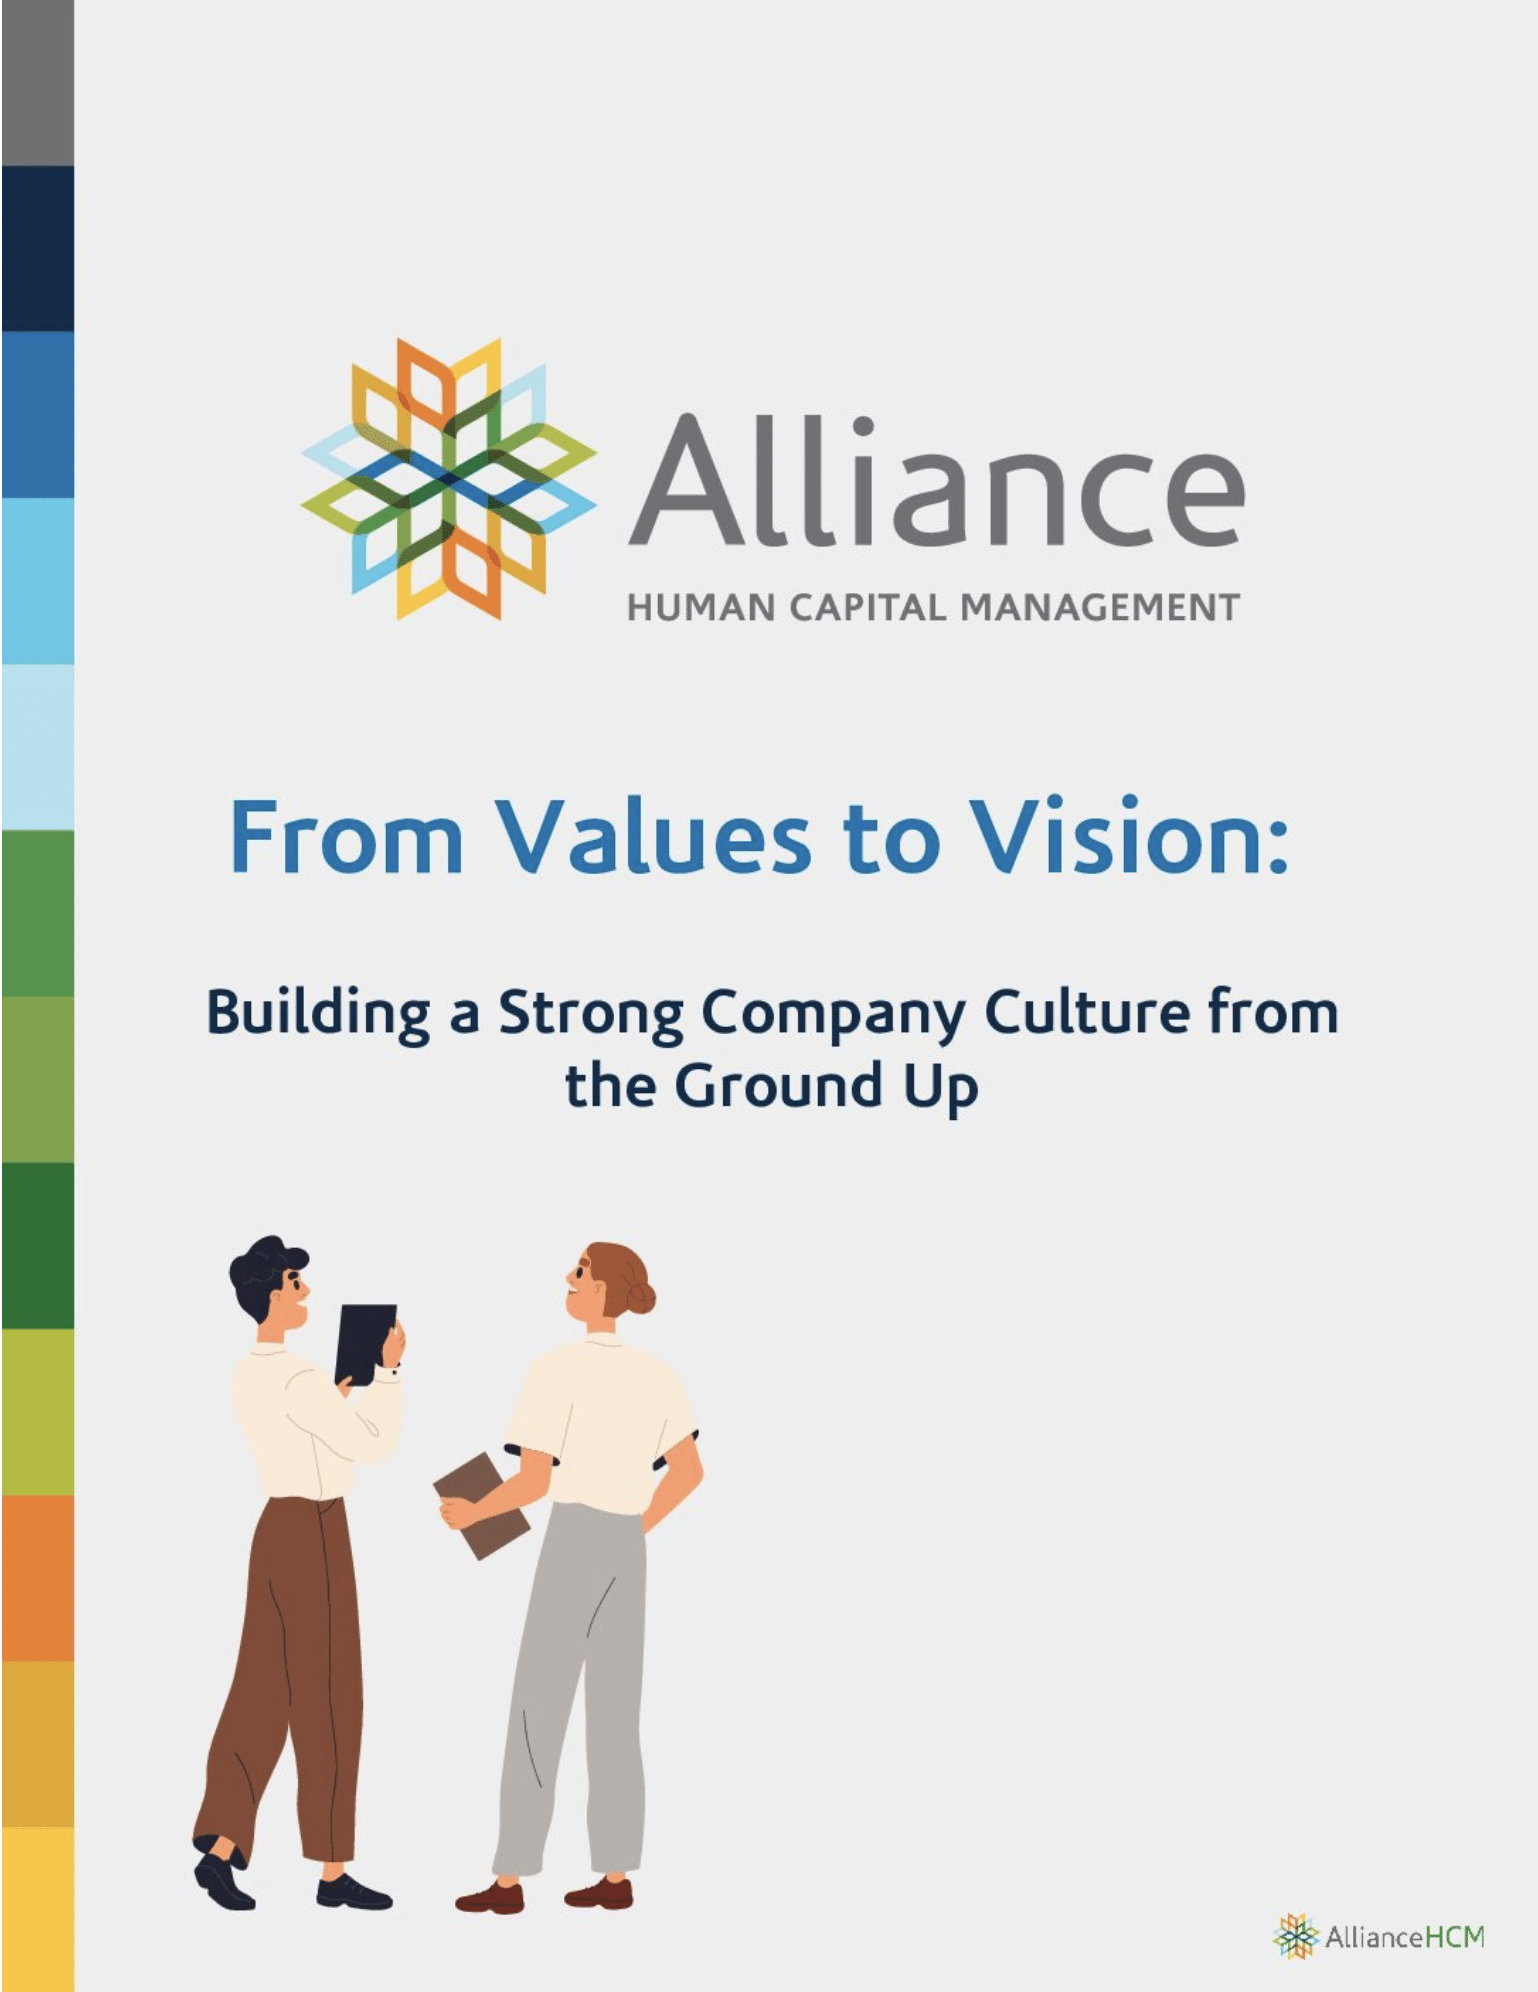 From Values to Vision